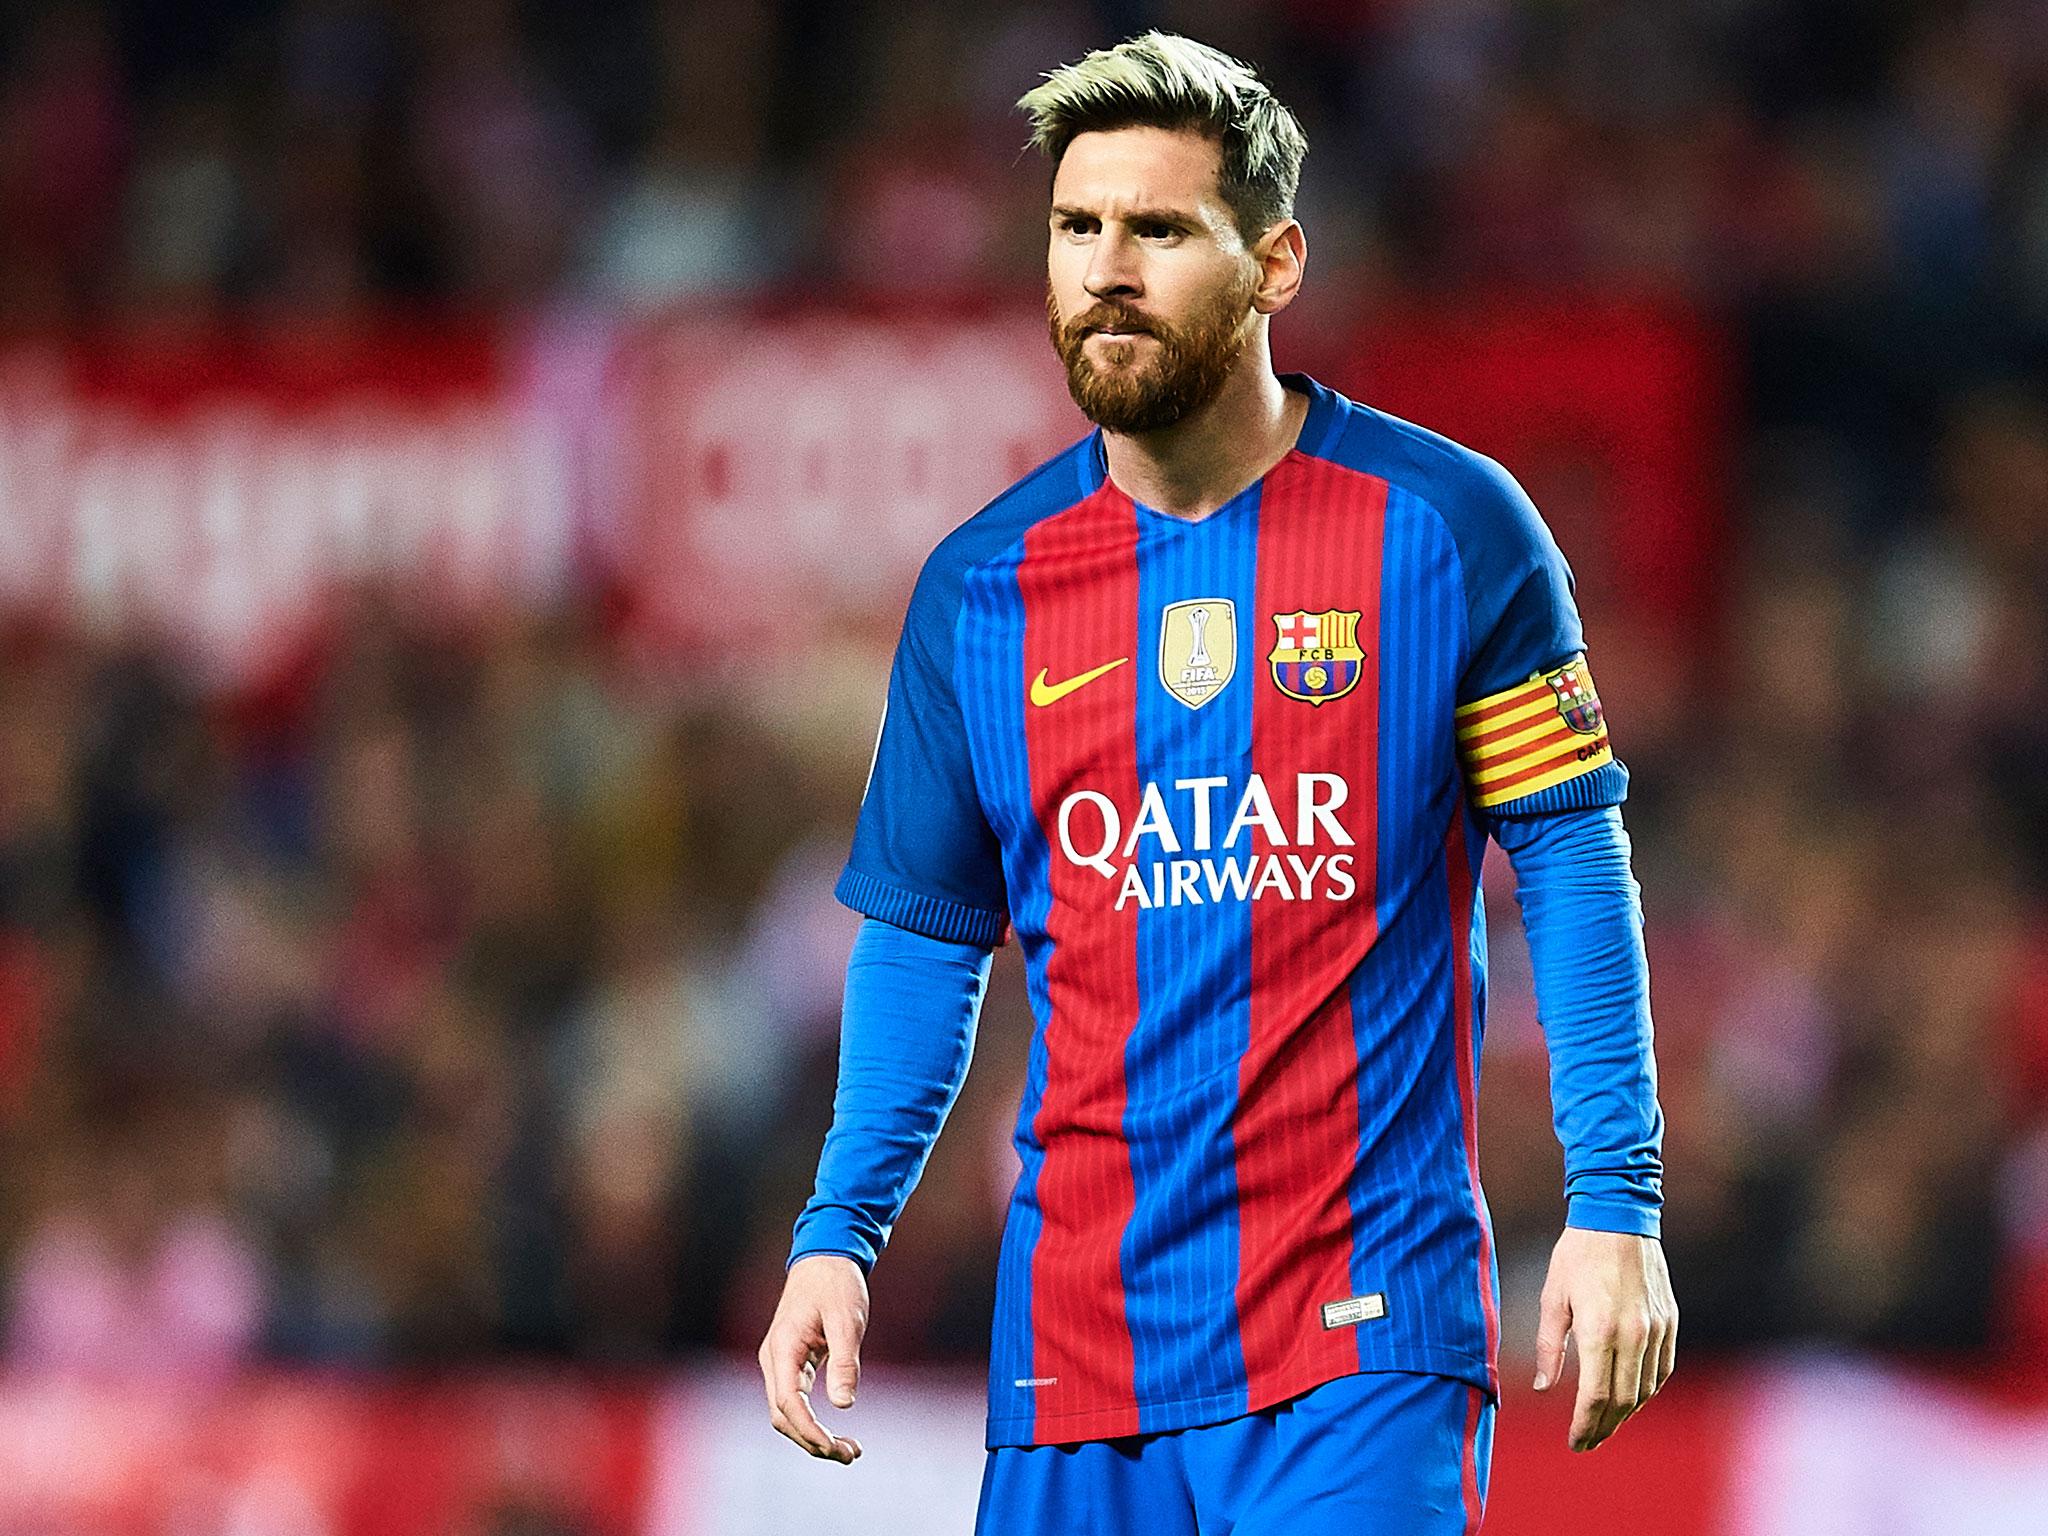 Messi Demands Barcelona Sign Premier League Star, Officials Fly To